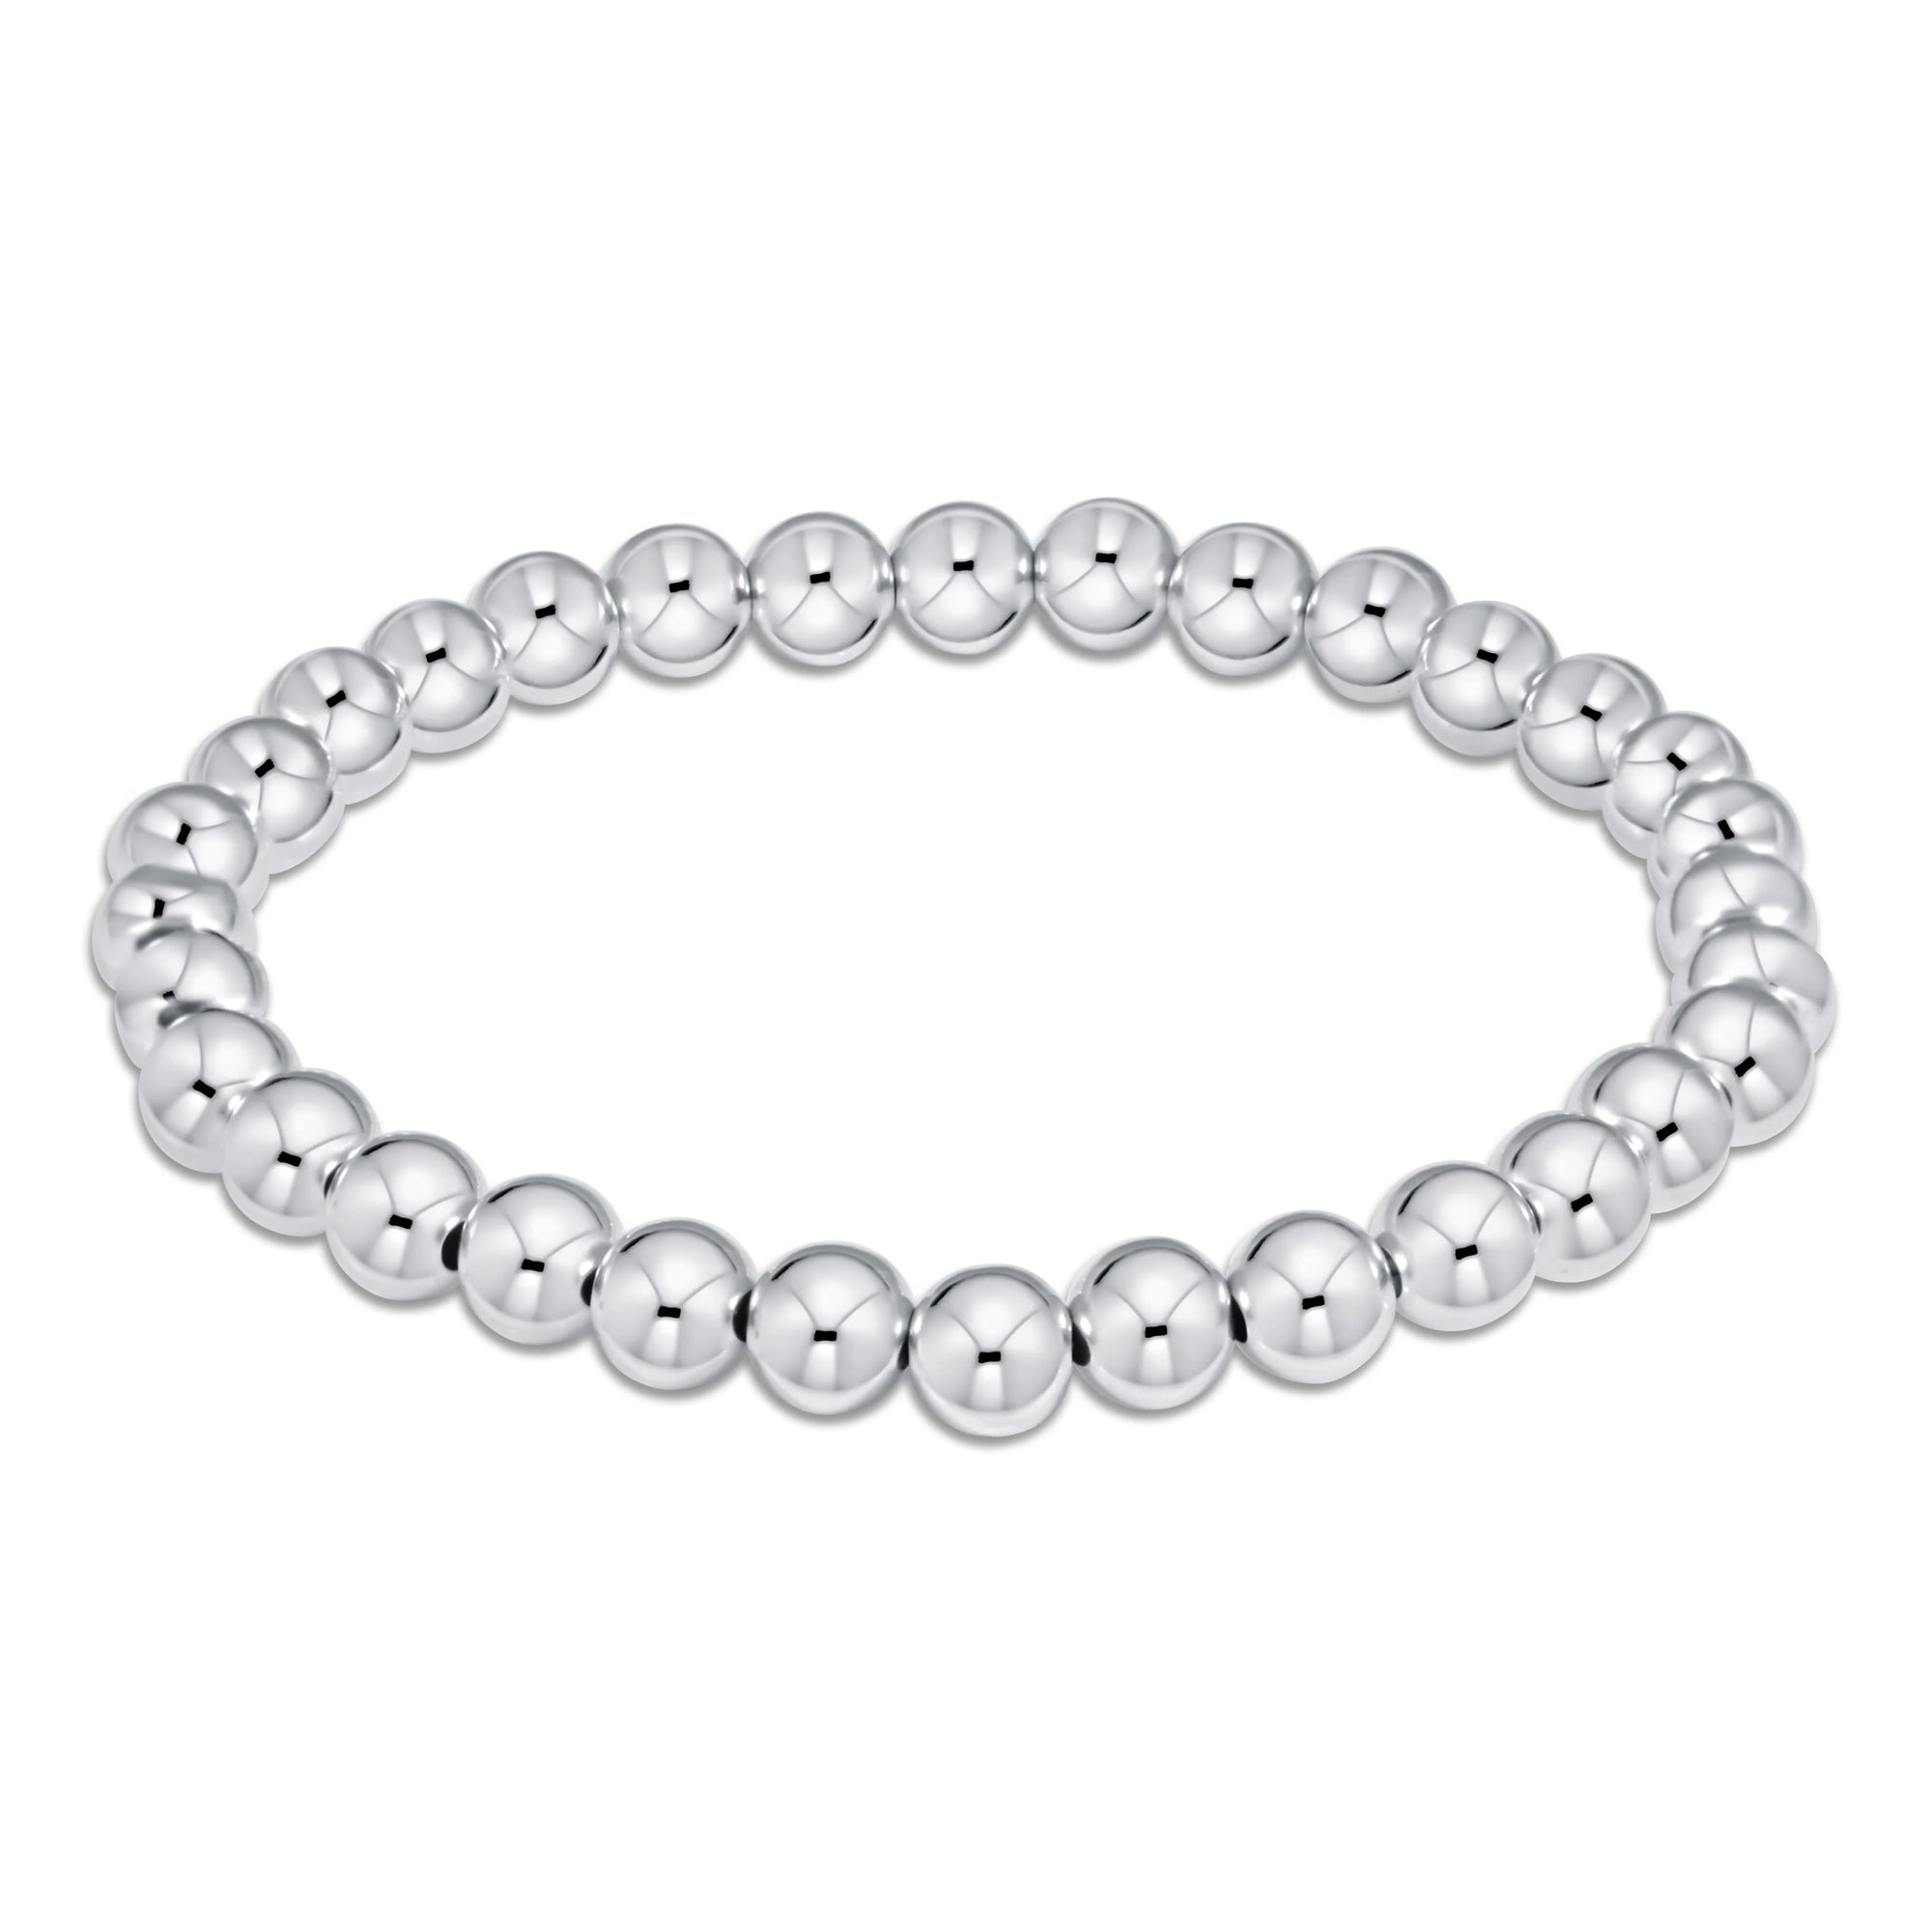 Classic Sterling Silver 6 mm Beaded Bracelet - Extended Size